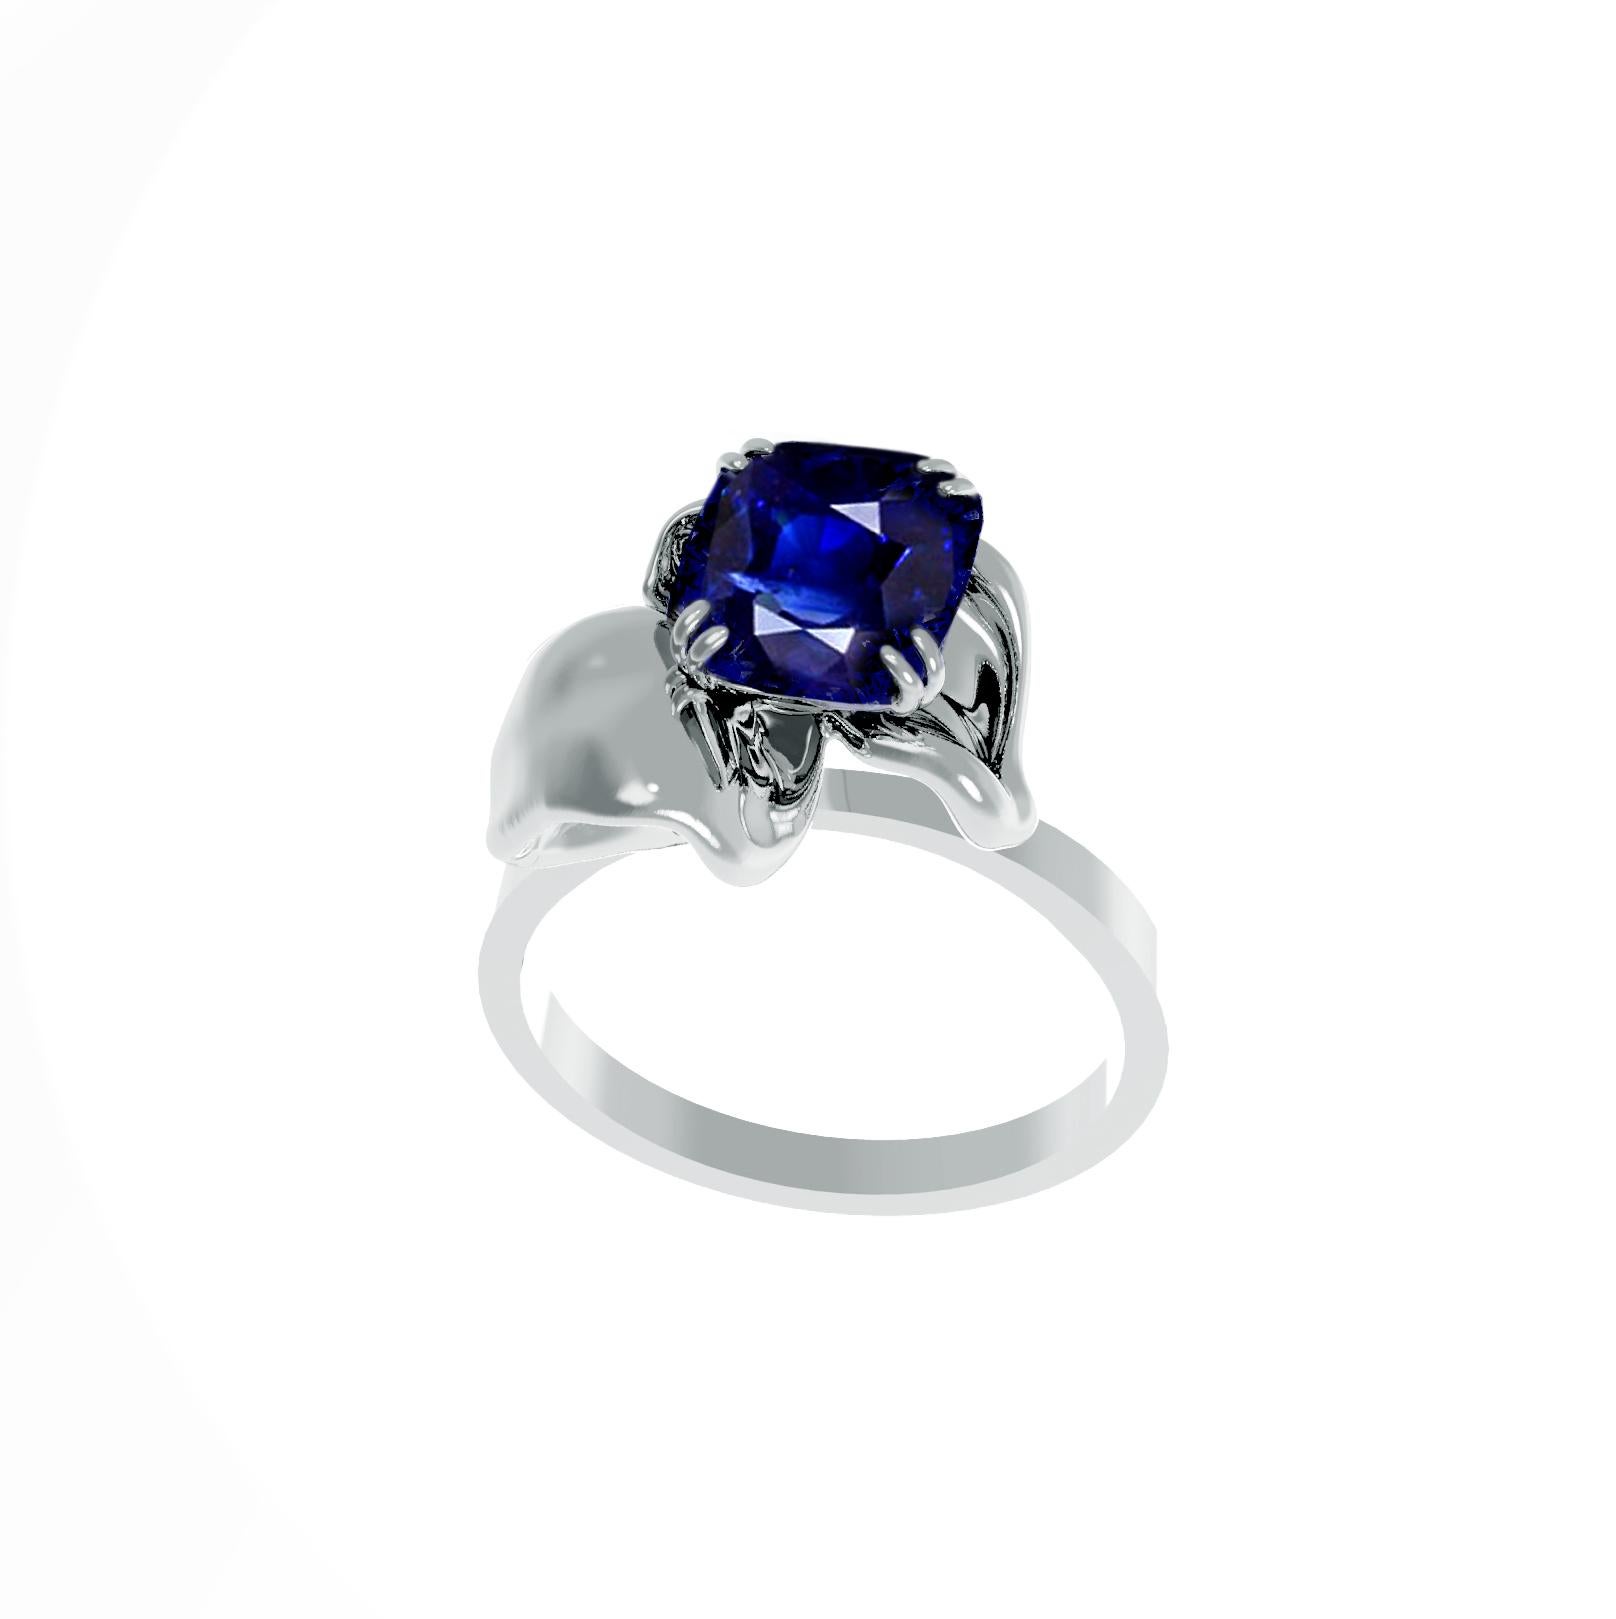 This contemporary cocktail ring is made of 18 karat white gold and is encrusted with a natural vivid blue great cut transparent cushion sapphire. The ring's unique design features a tiny flower shape that visually enhances the size of the gem,